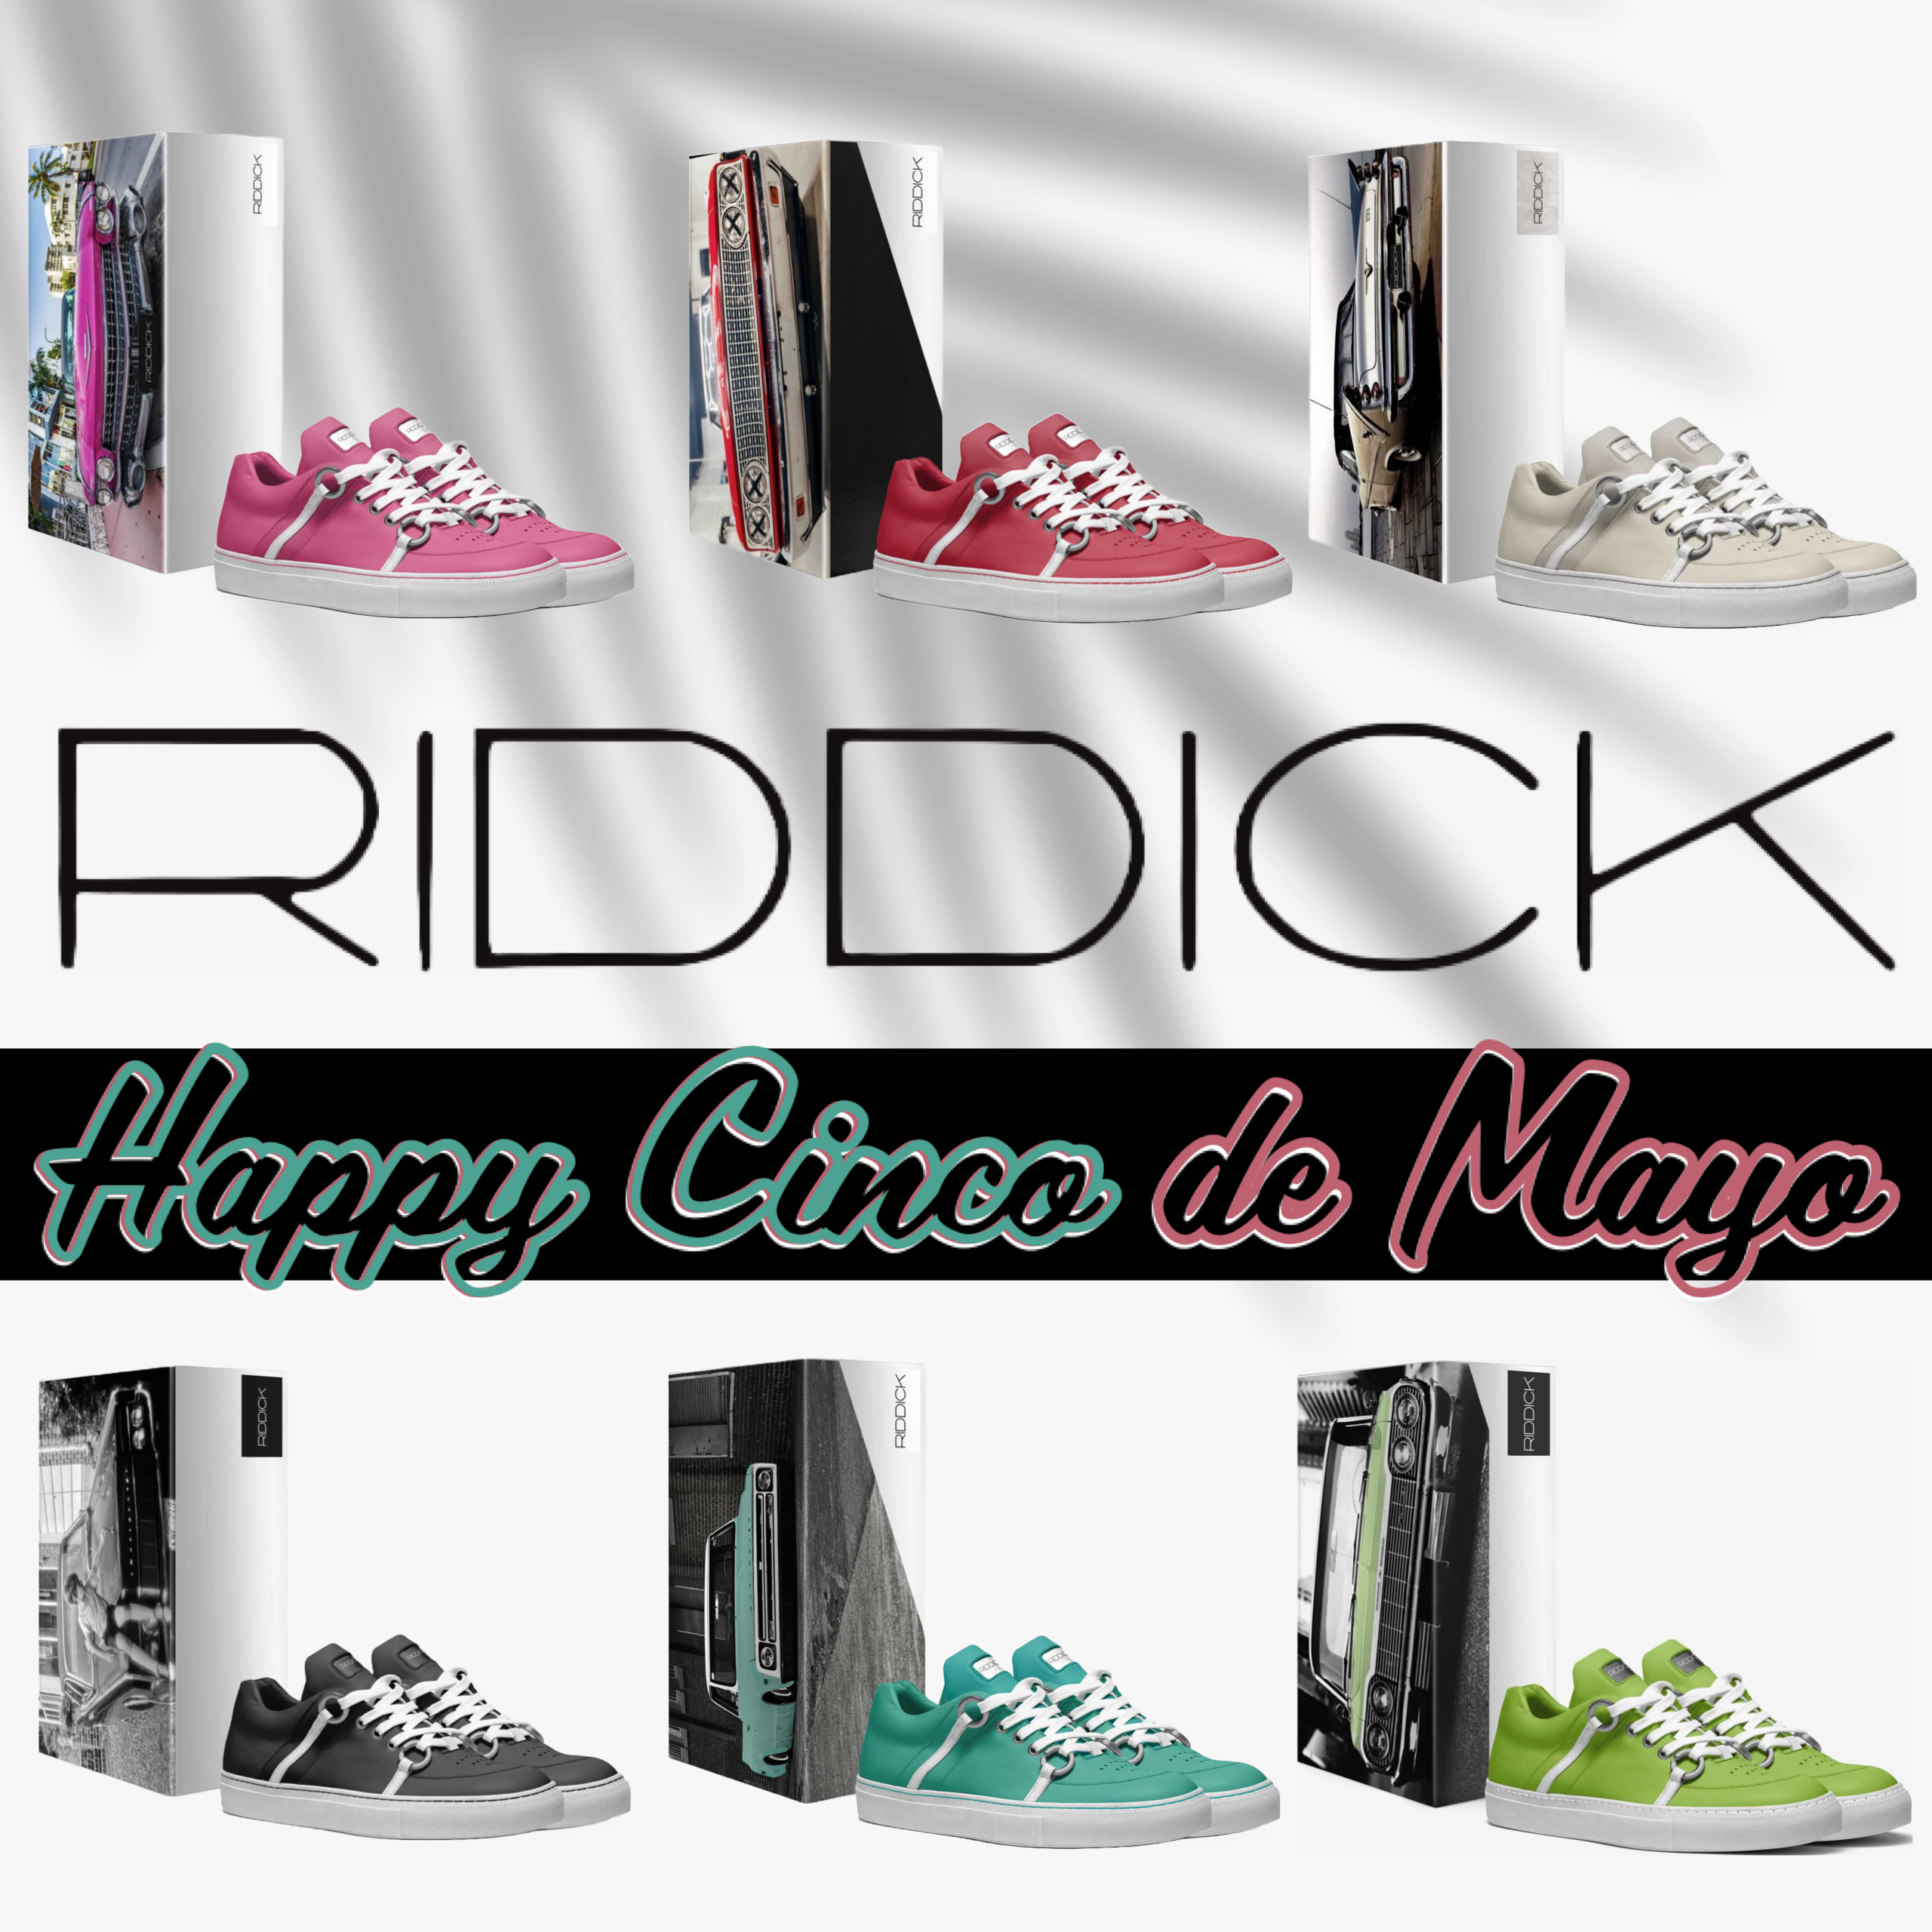 3 Ways to Spice Up Your Cinco de Mayo Outfits with RIDDICK Shoes